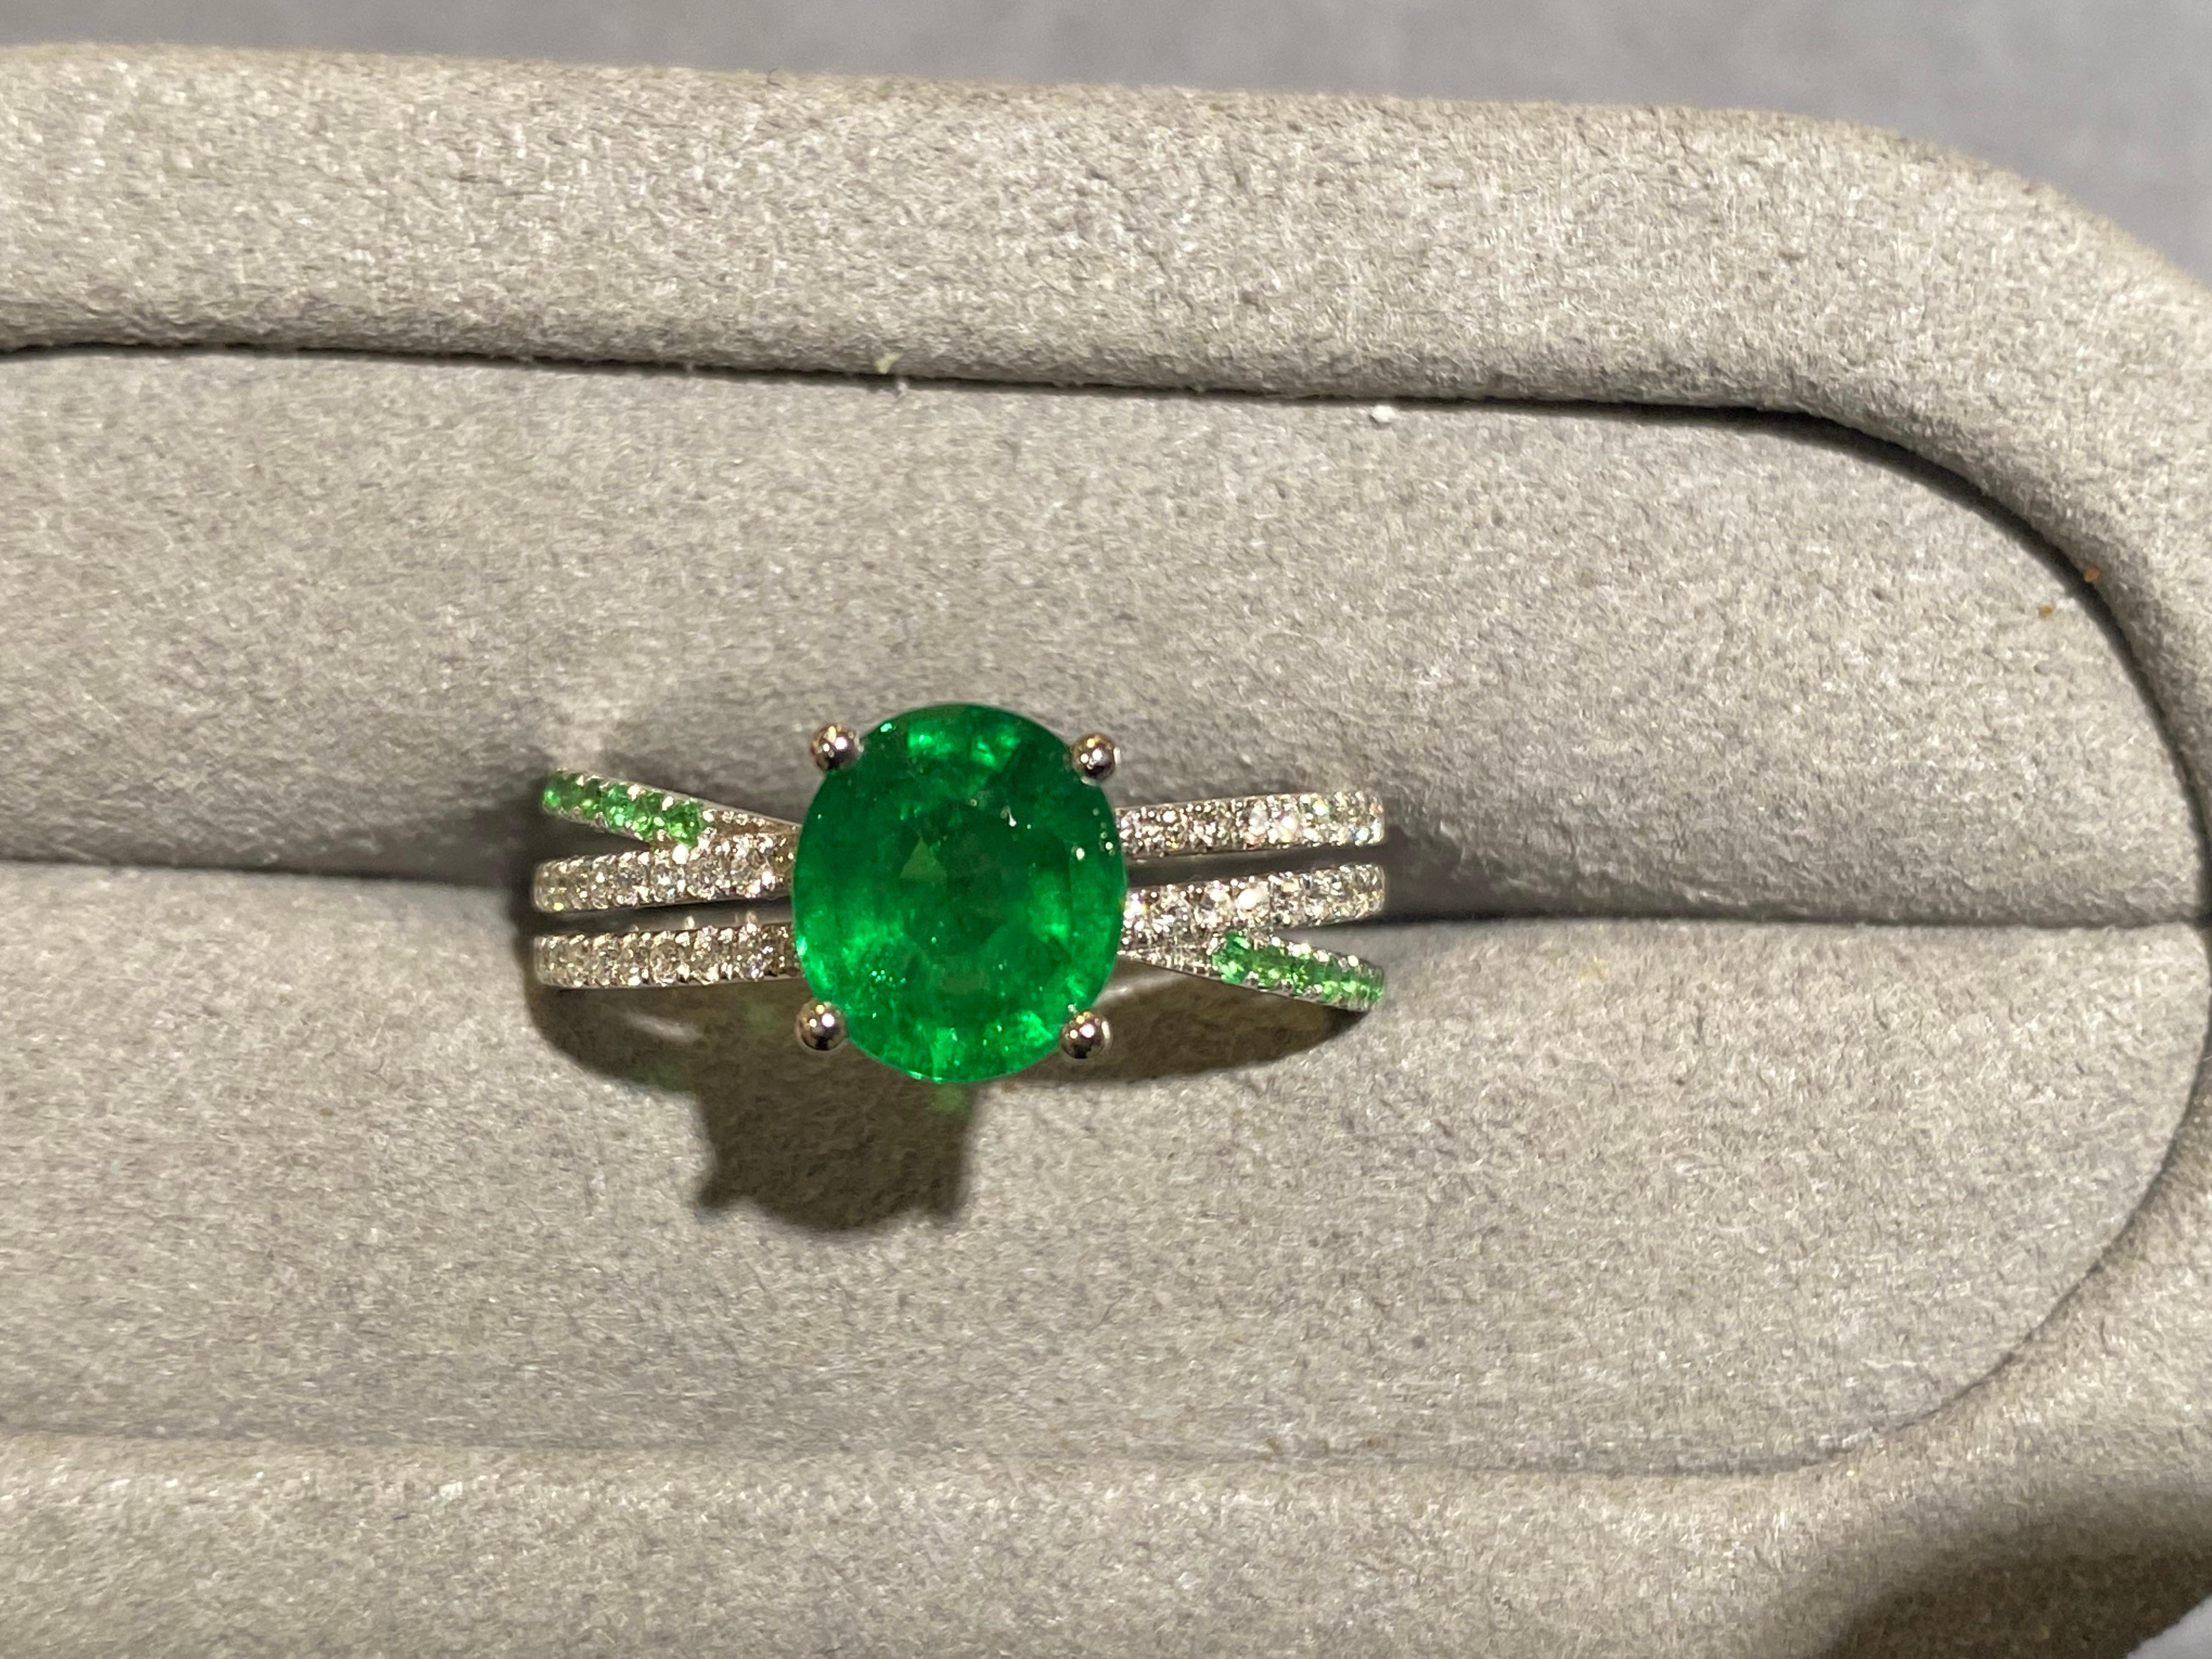 A 1.81 ct Tsavorite and diamond ring in 18k white gold. The main Tsavorite is secured by 4 white gold claws and the band of the ring is made up of 3 individual pave bands. The 2 diamond pave bends are parallel to each other while the tsavorite pave